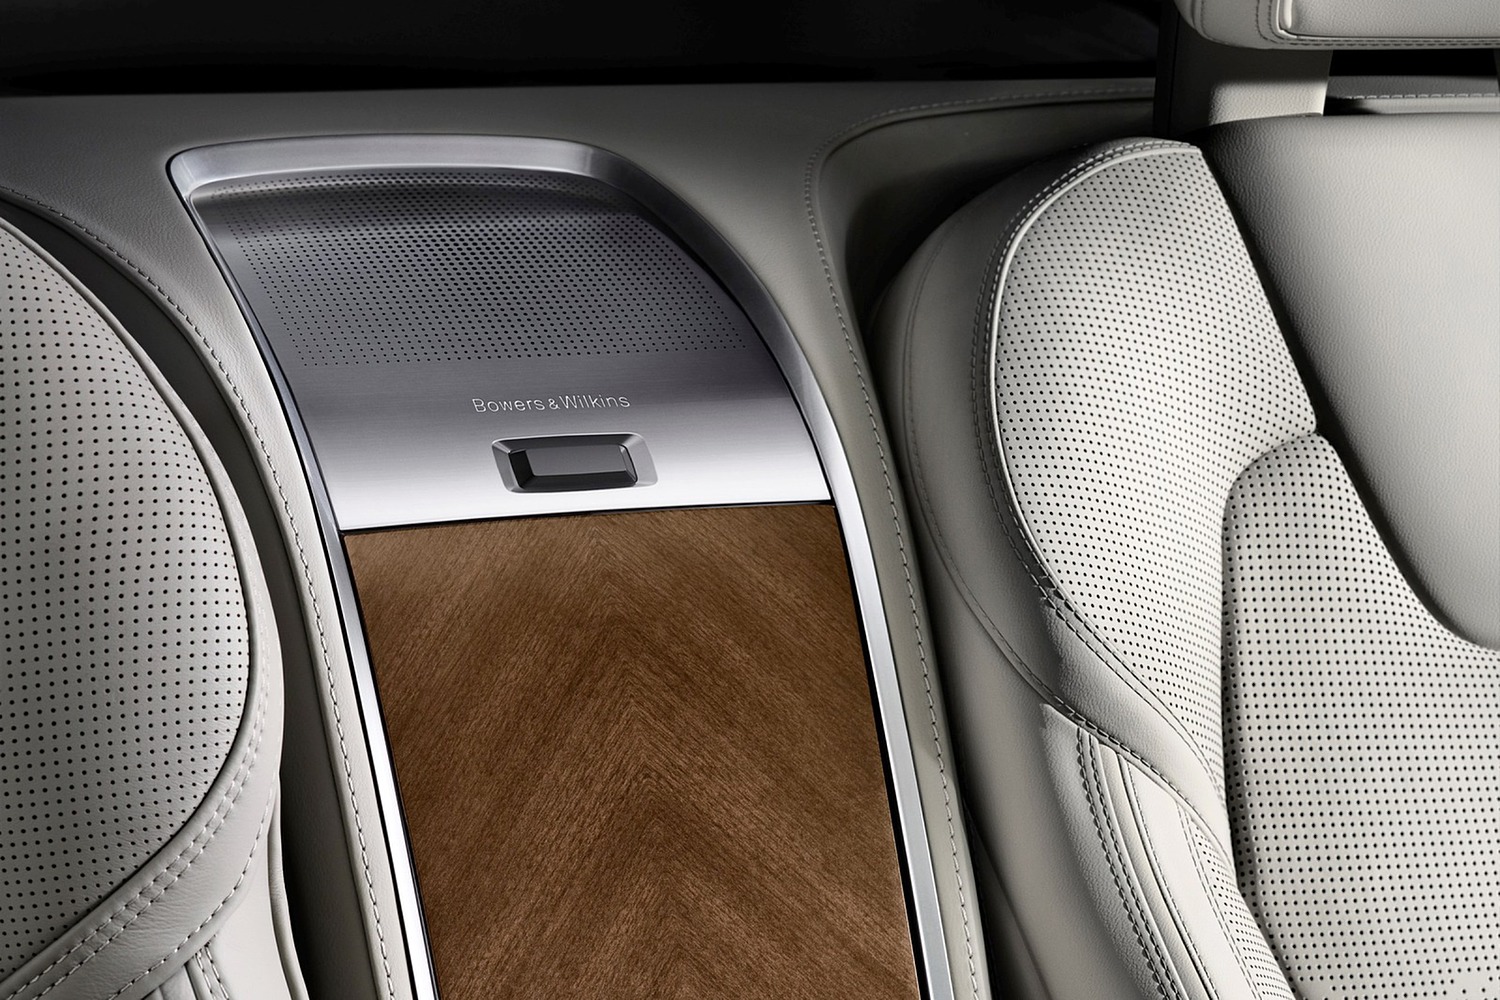 Volvo XC90 T8 Excellence Twin Engine Plug-In Hybrid 4dr SUV Interior Detail (2017 model year shown)